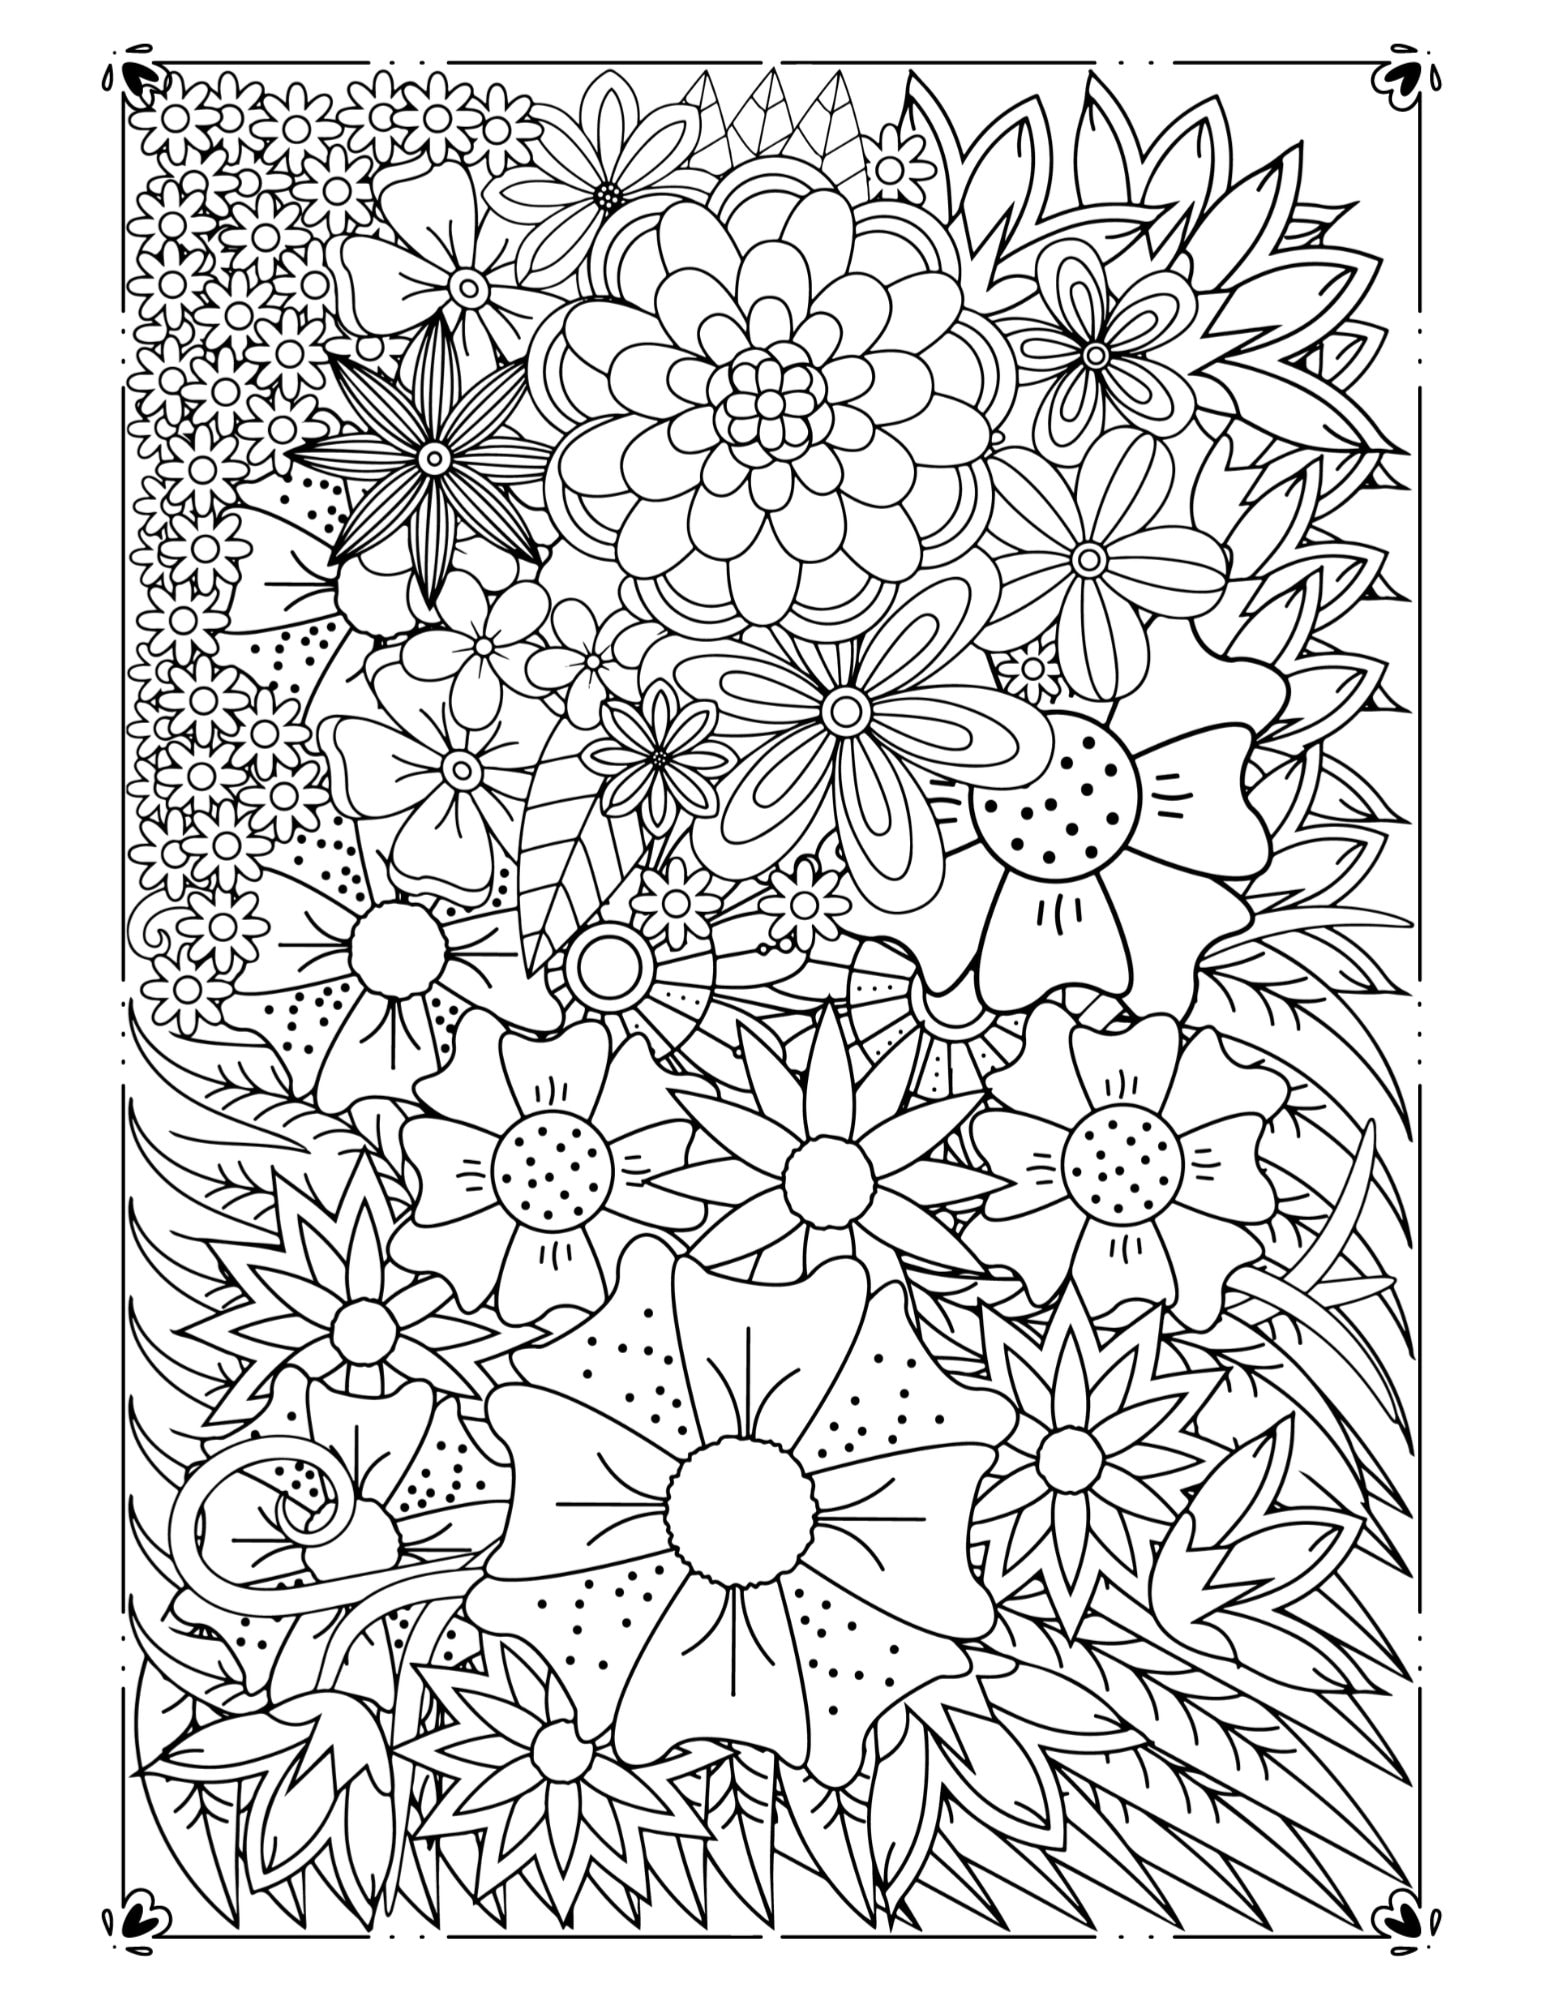 Adult Adult Coloring Books for Stress Relief Coloring Book for Girls Doodle  Cutes by Adult Adult Coloring Books for Stress Relief, Paperback, Indigo  Chapters